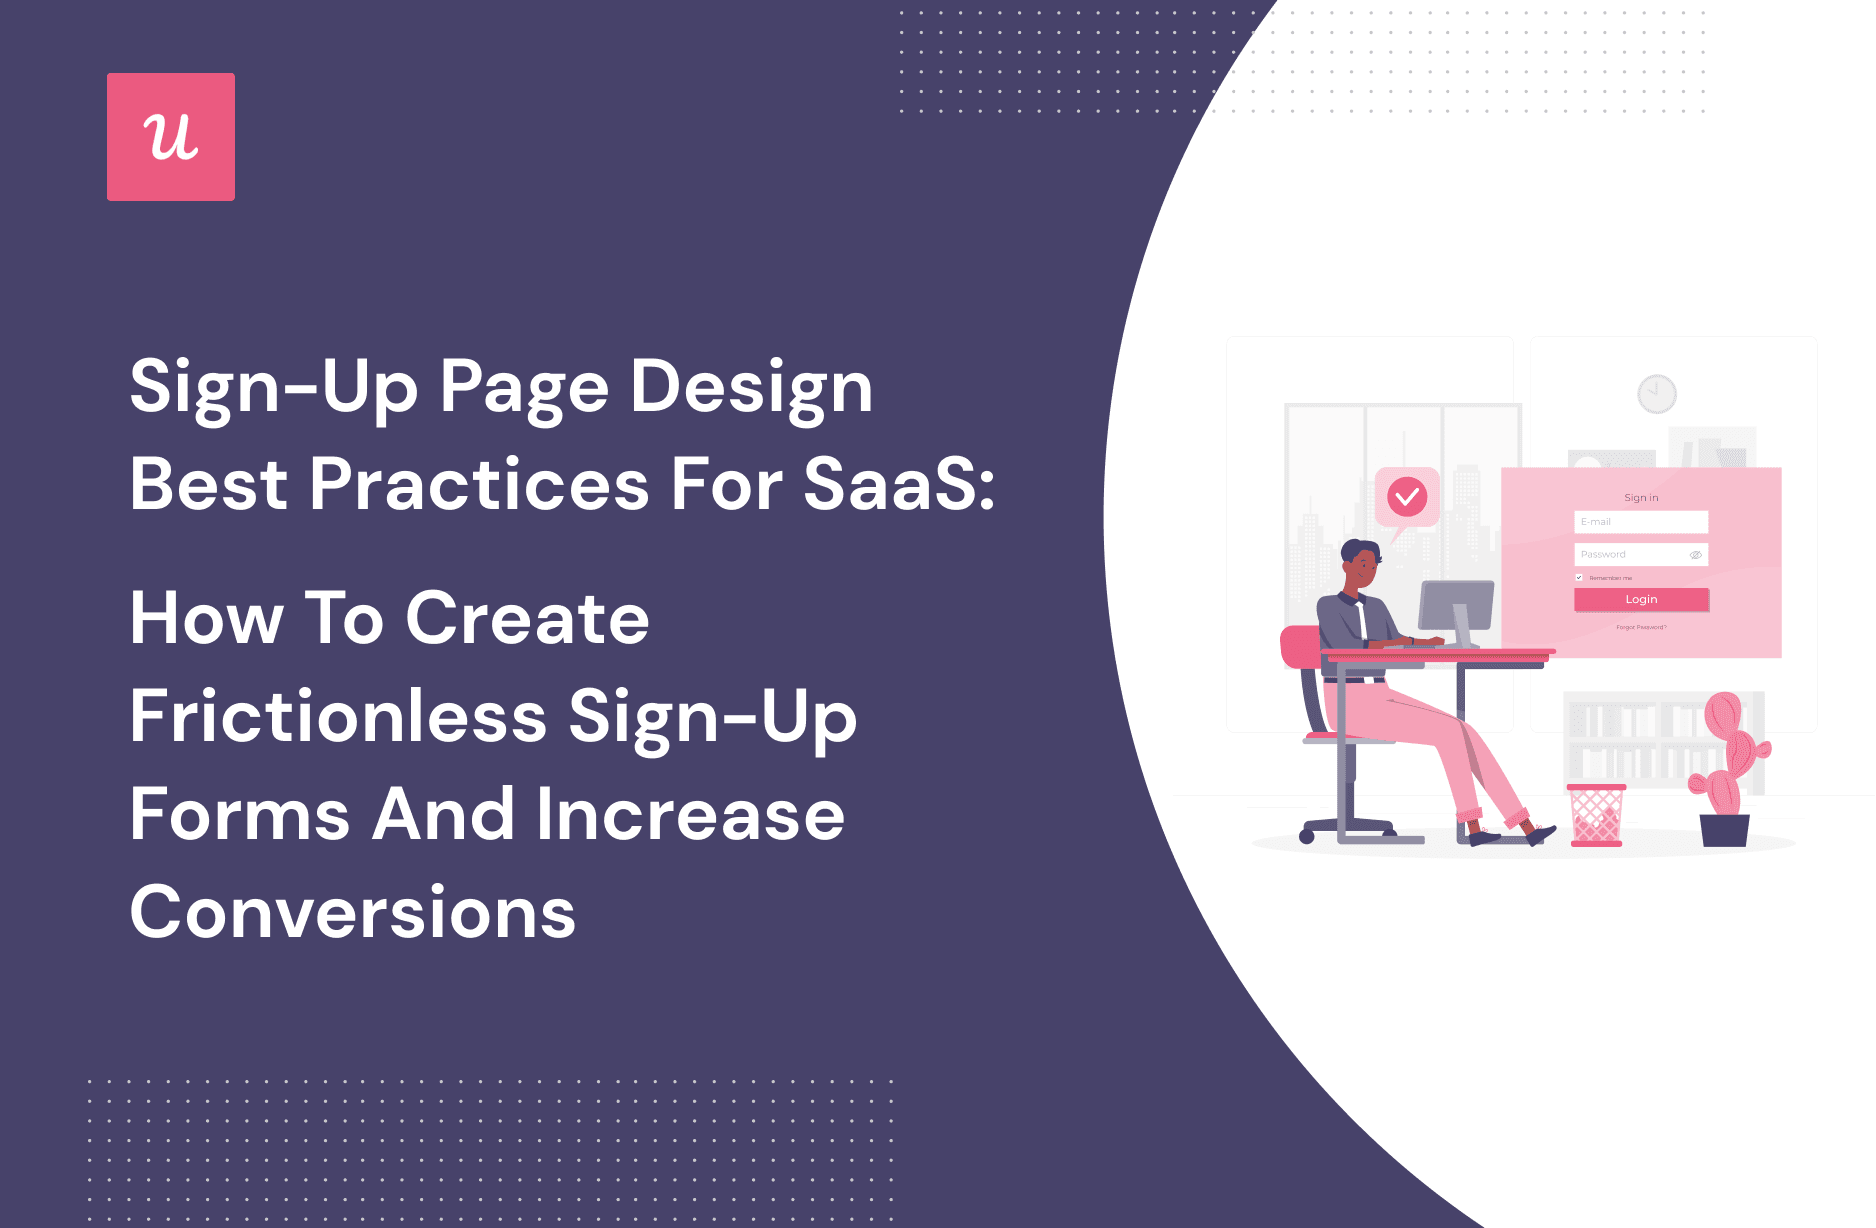 Sign-Up Page Design Best Practices for SaaS: How to Create Frictionless Sign-Up Forms and Increase Conversions cover